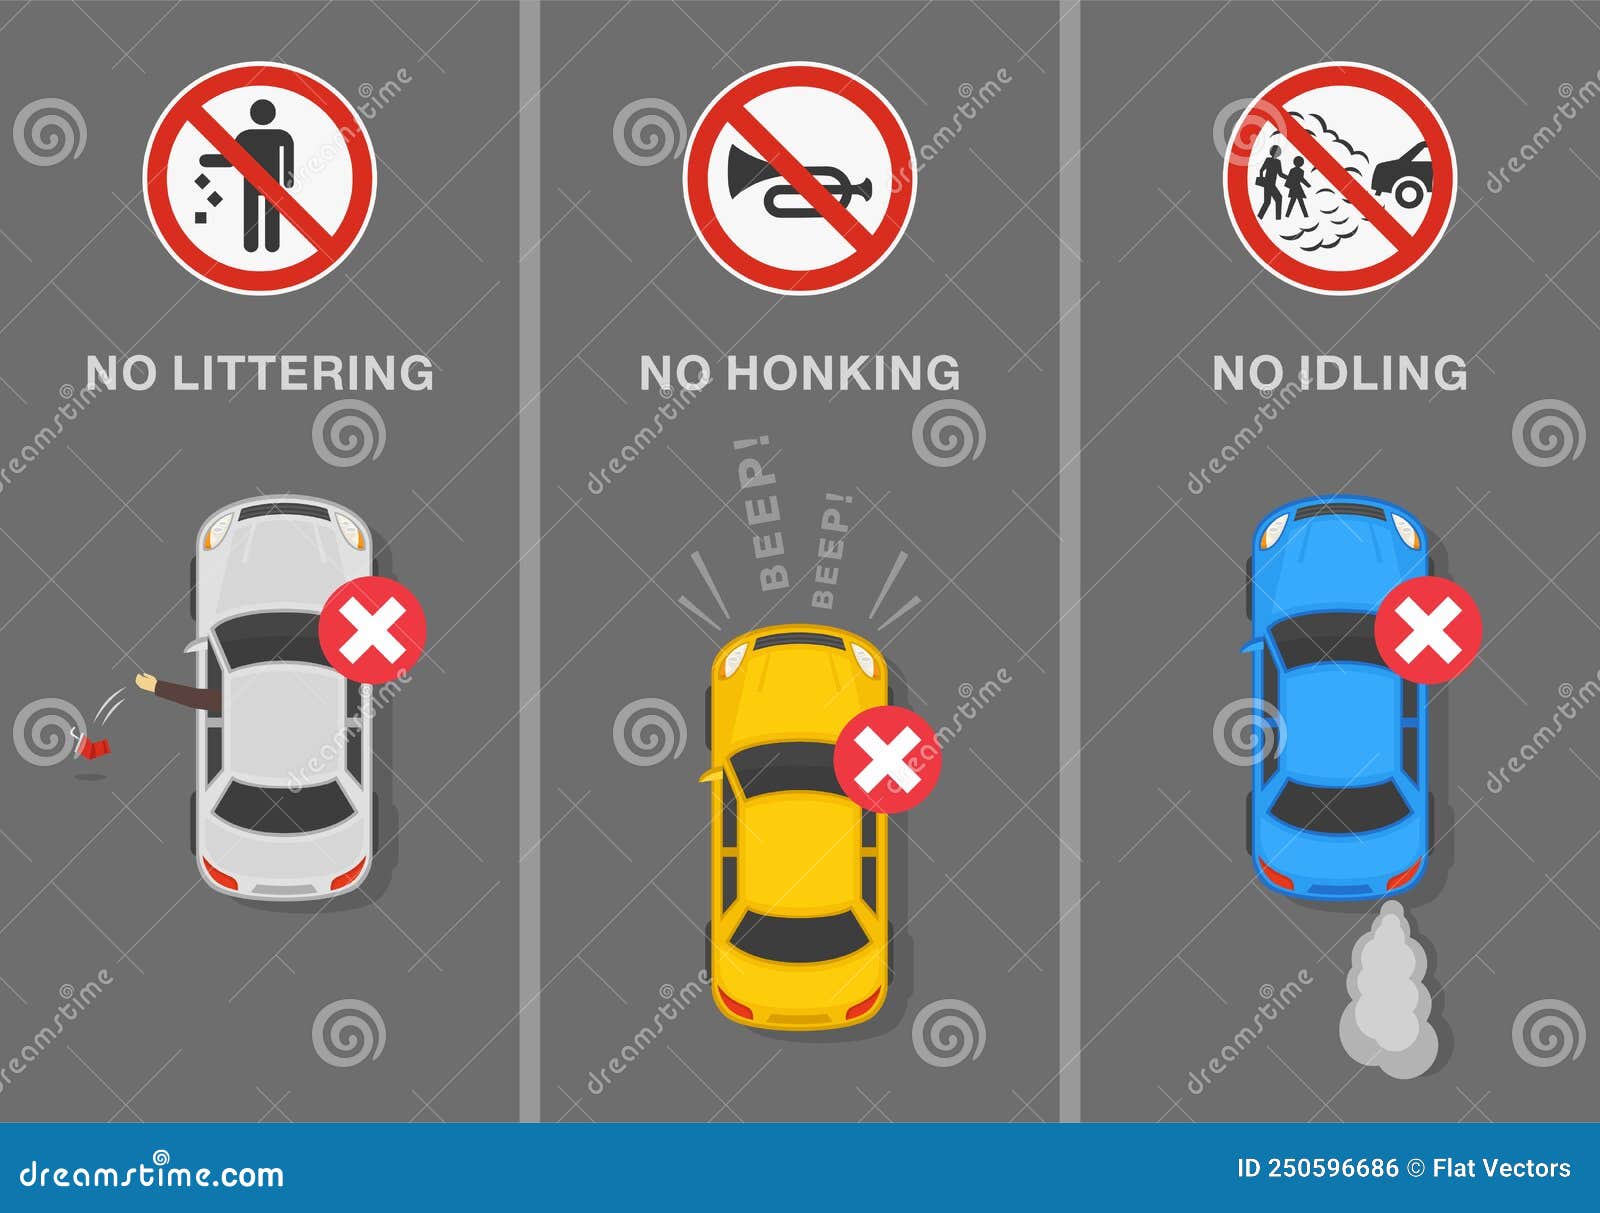 What Does Idling Mean?